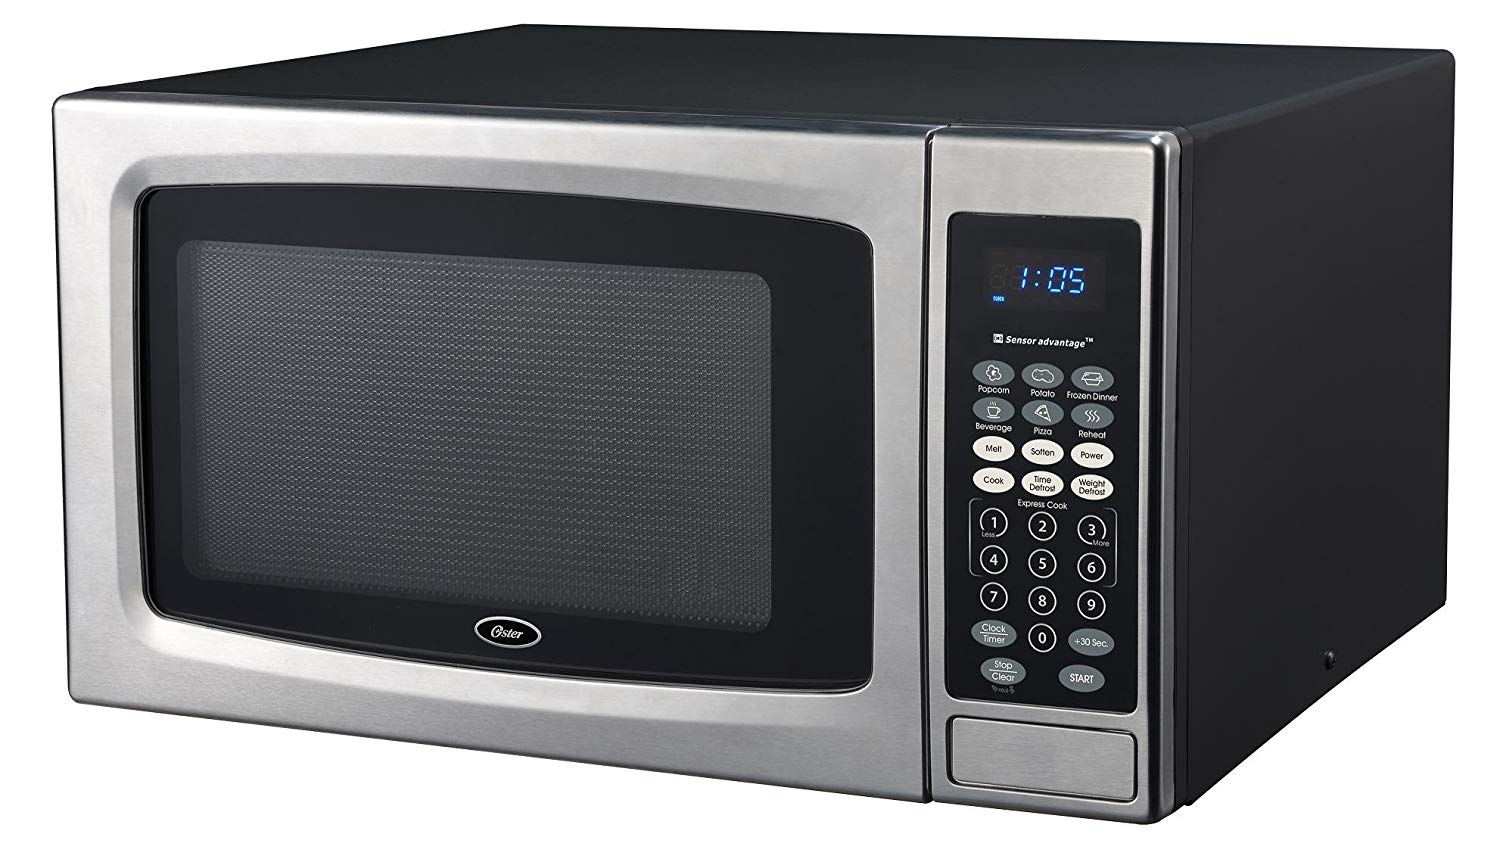 Oster OGZE1304S 1100W Sensor Microwave Oven, 1.3 cu. ft, Stainless